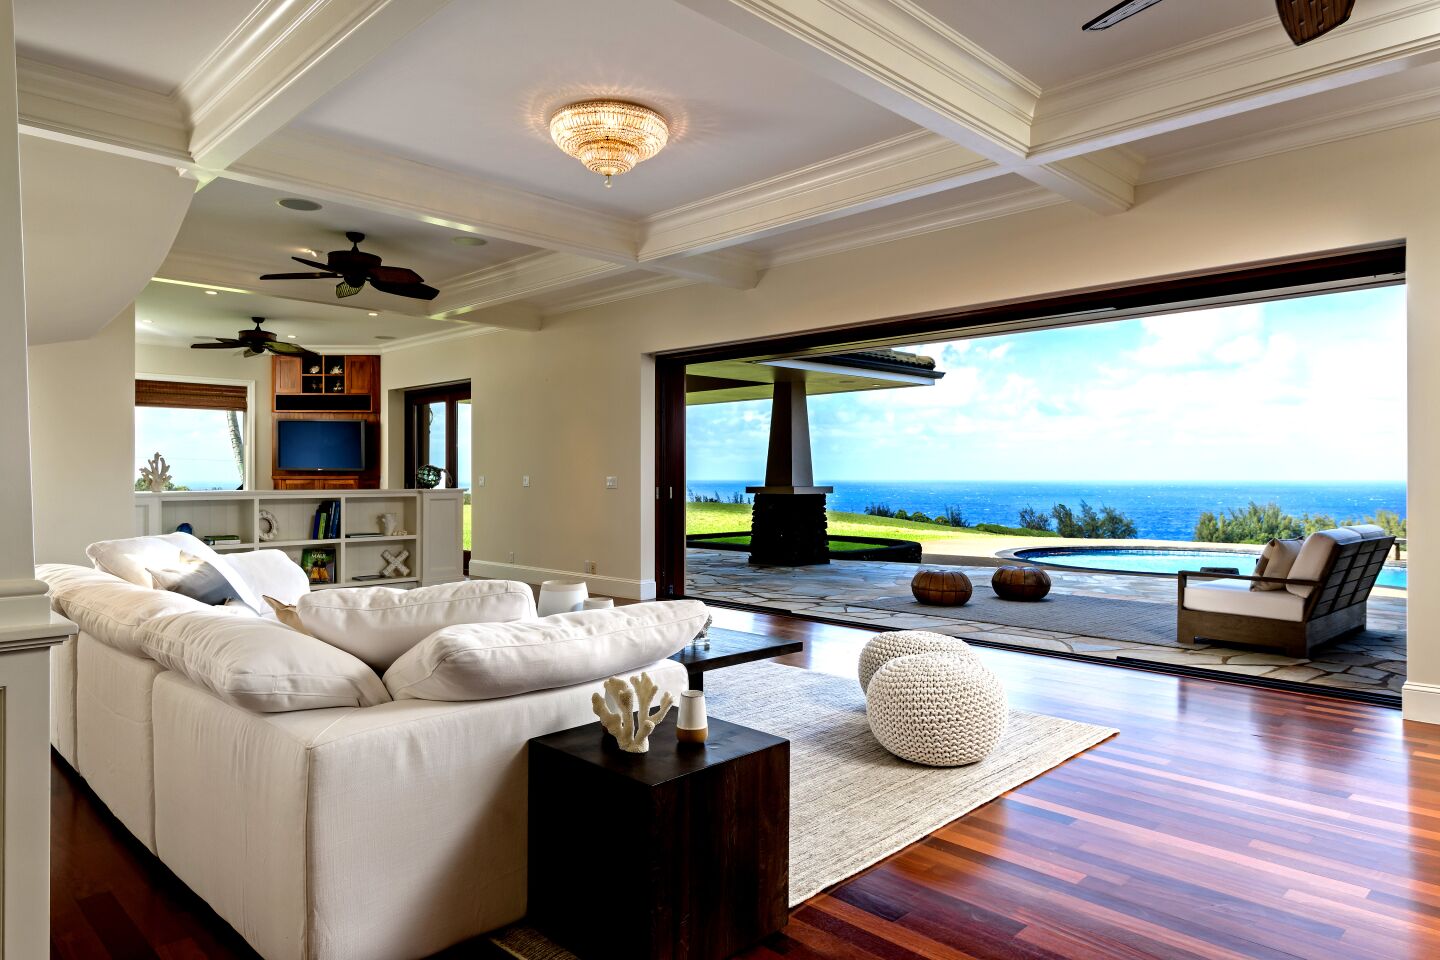 A picture window overlooks the ocean in the formal dining room.